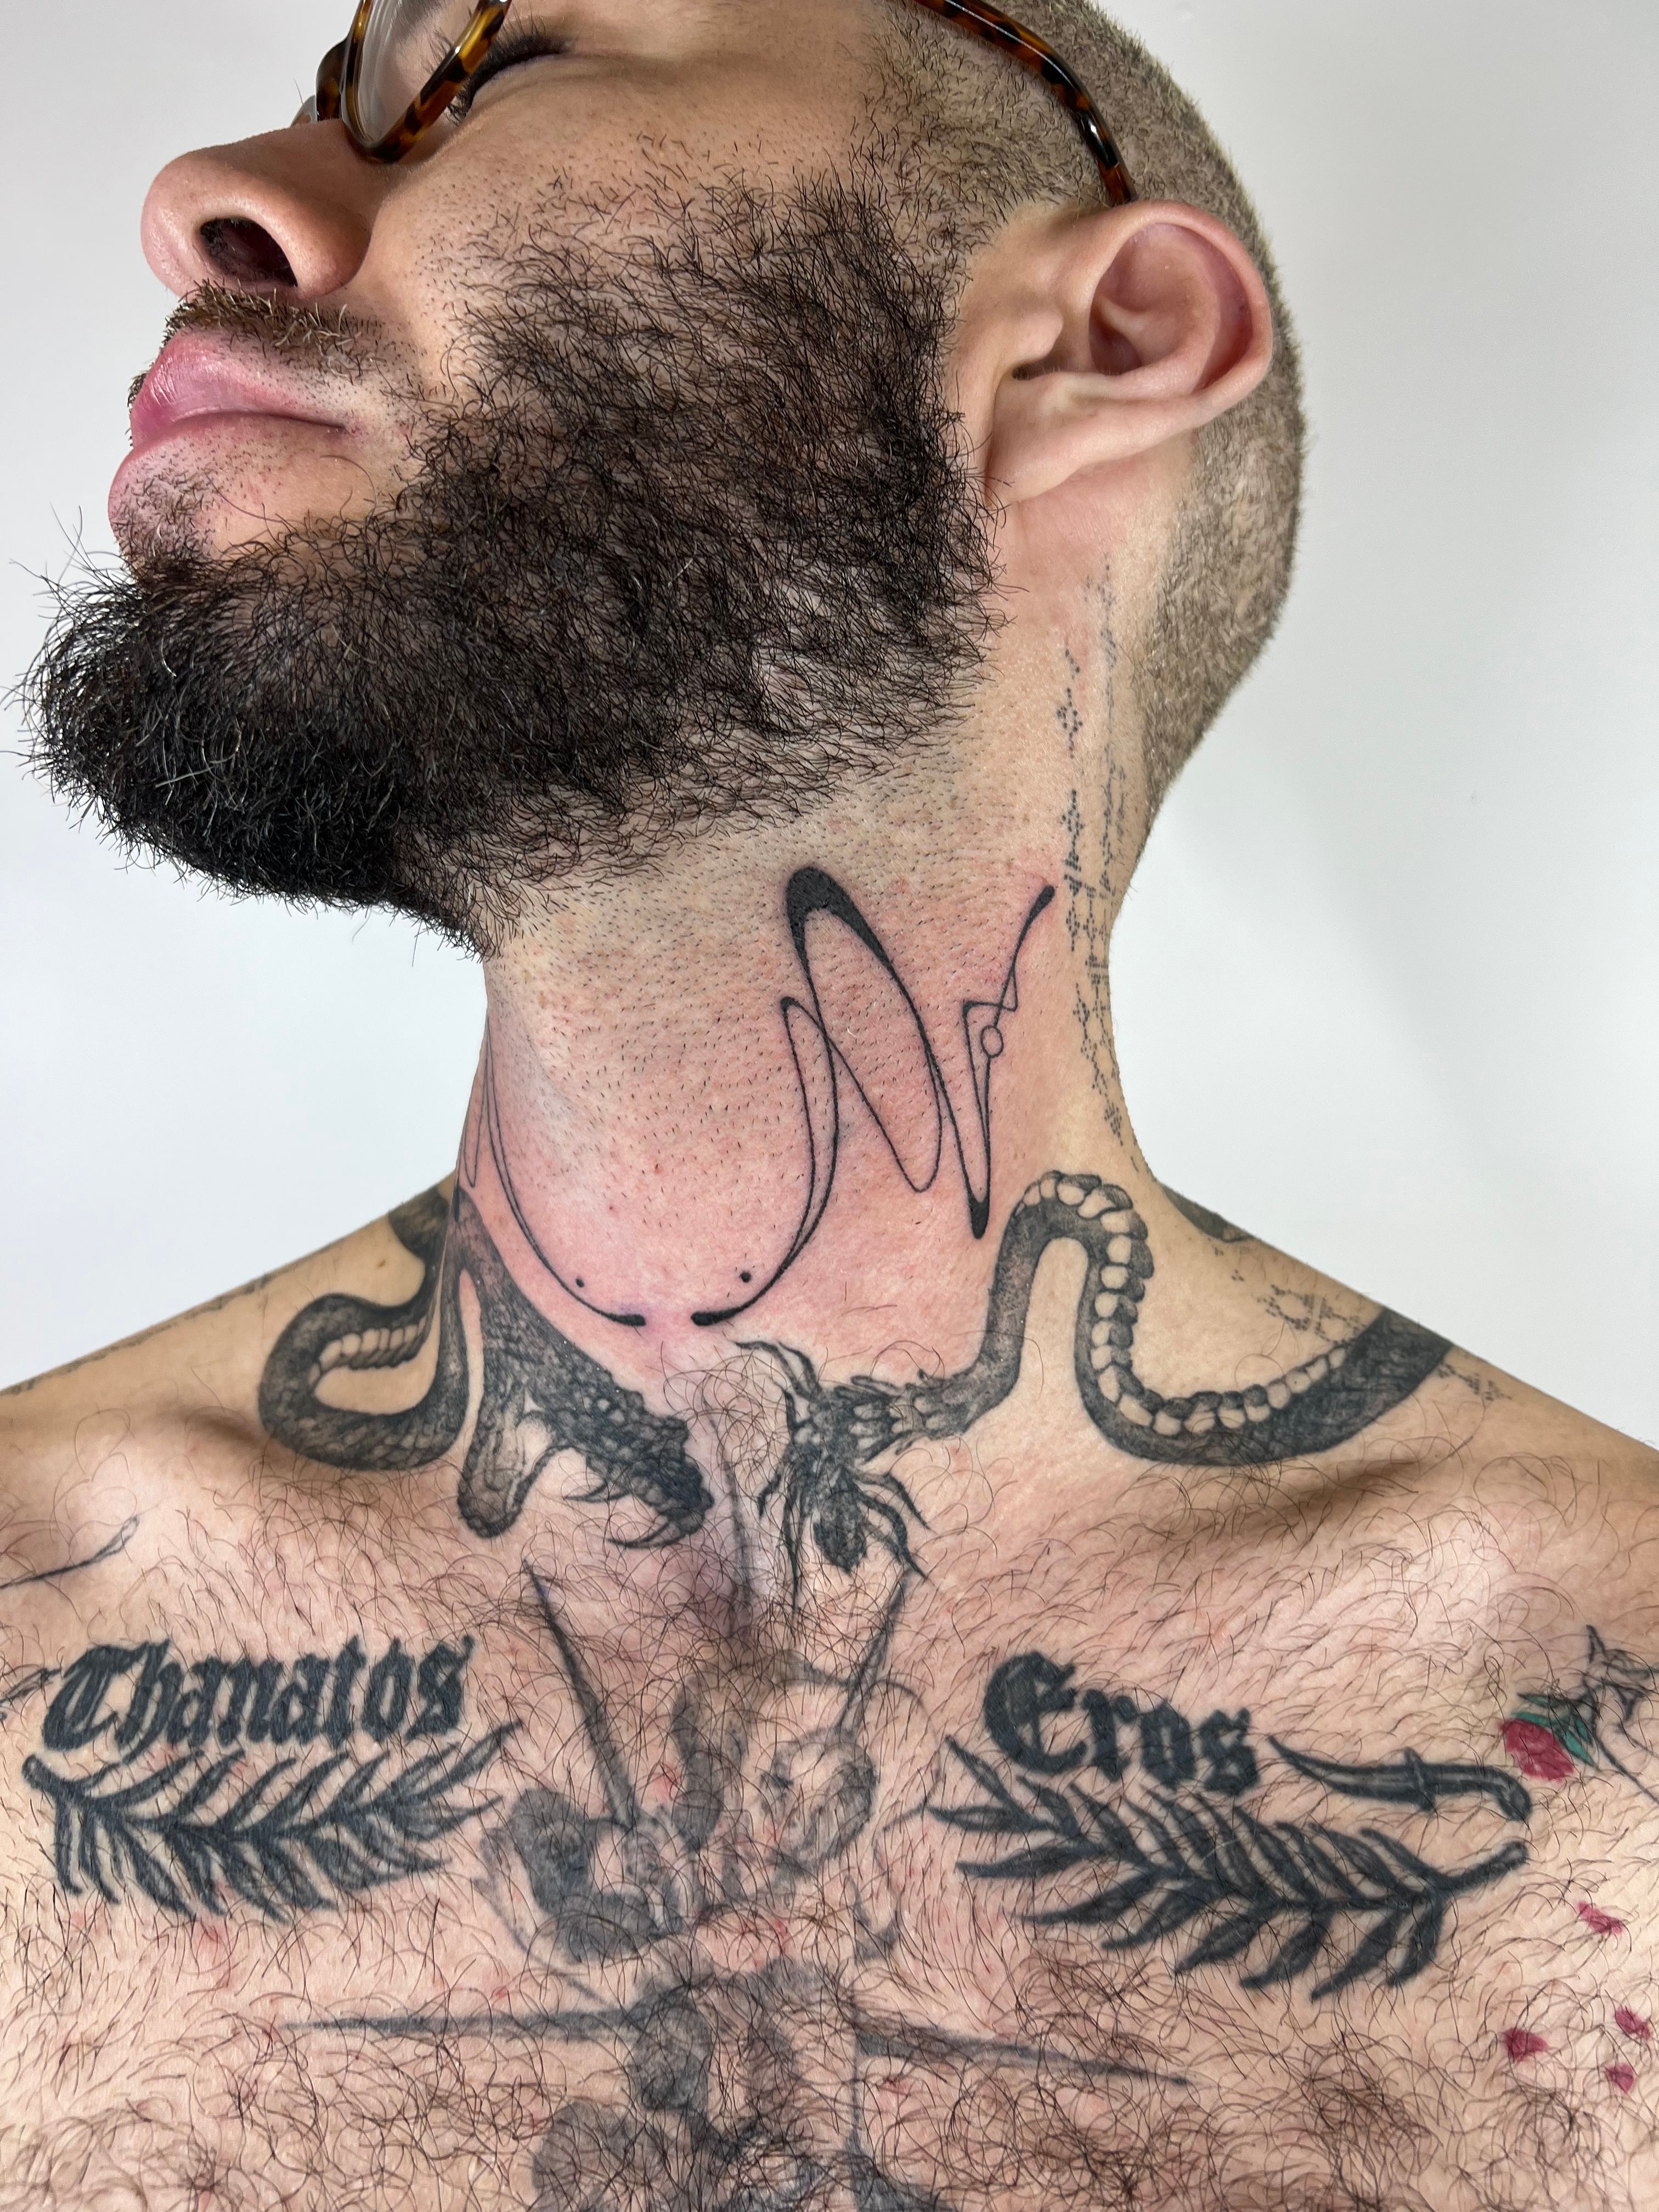 Piercings, tattoos and the ballet of bullets